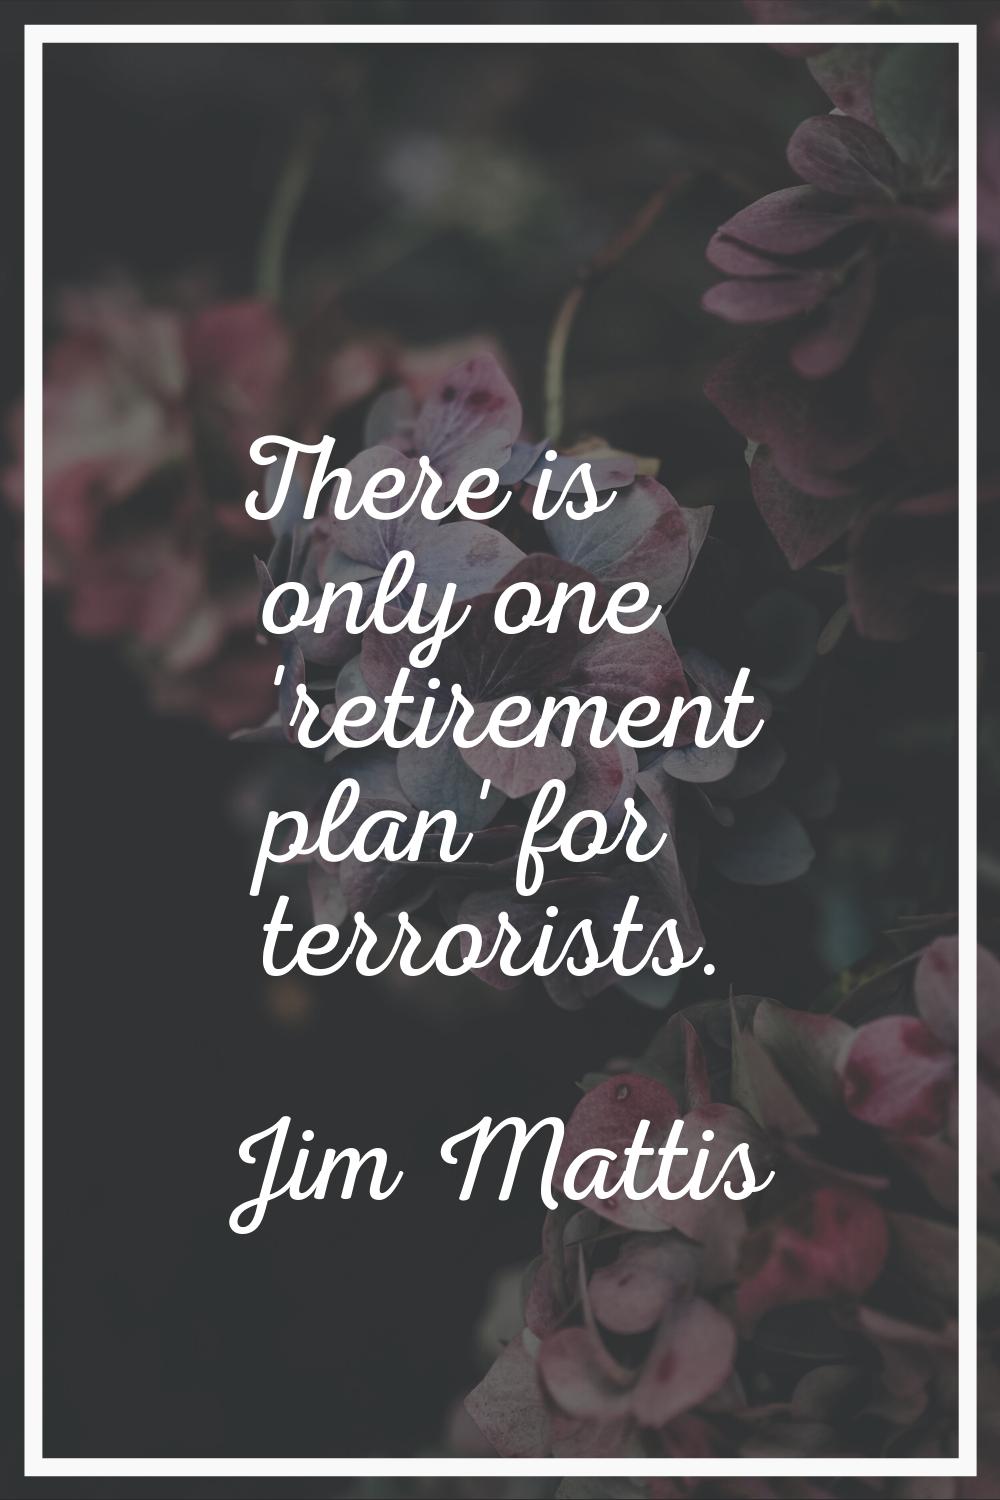 There is only one 'retirement plan' for terrorists.